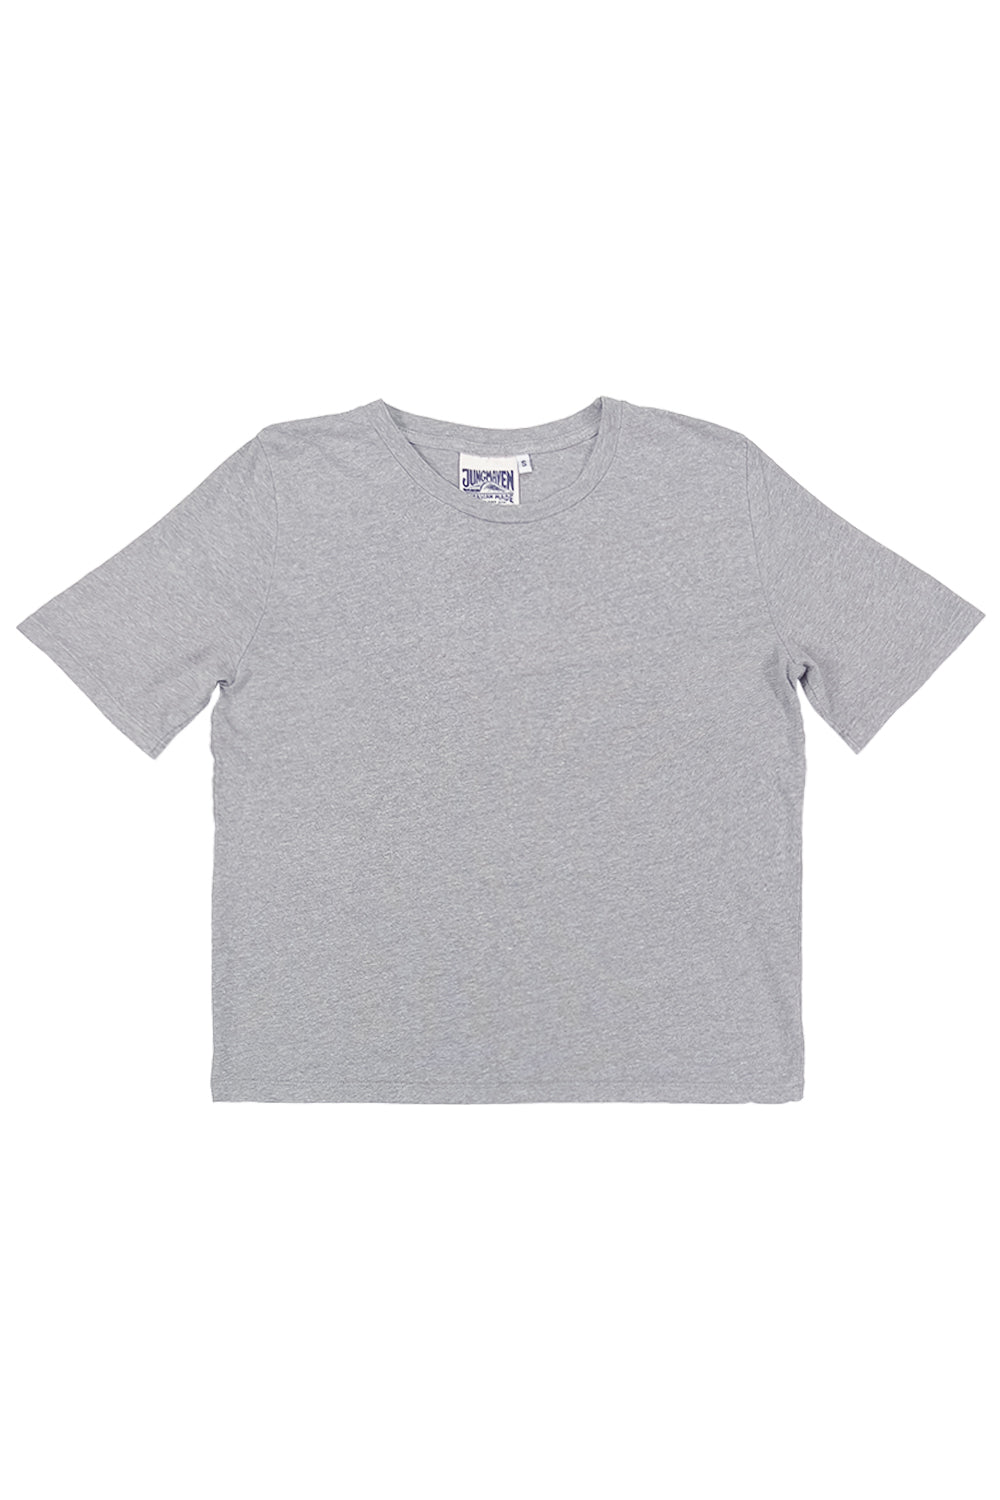 Heathered Silverlake Cropped Tee | Jungmaven Hemp Clothing & Accessories / Color: Athletic Gray